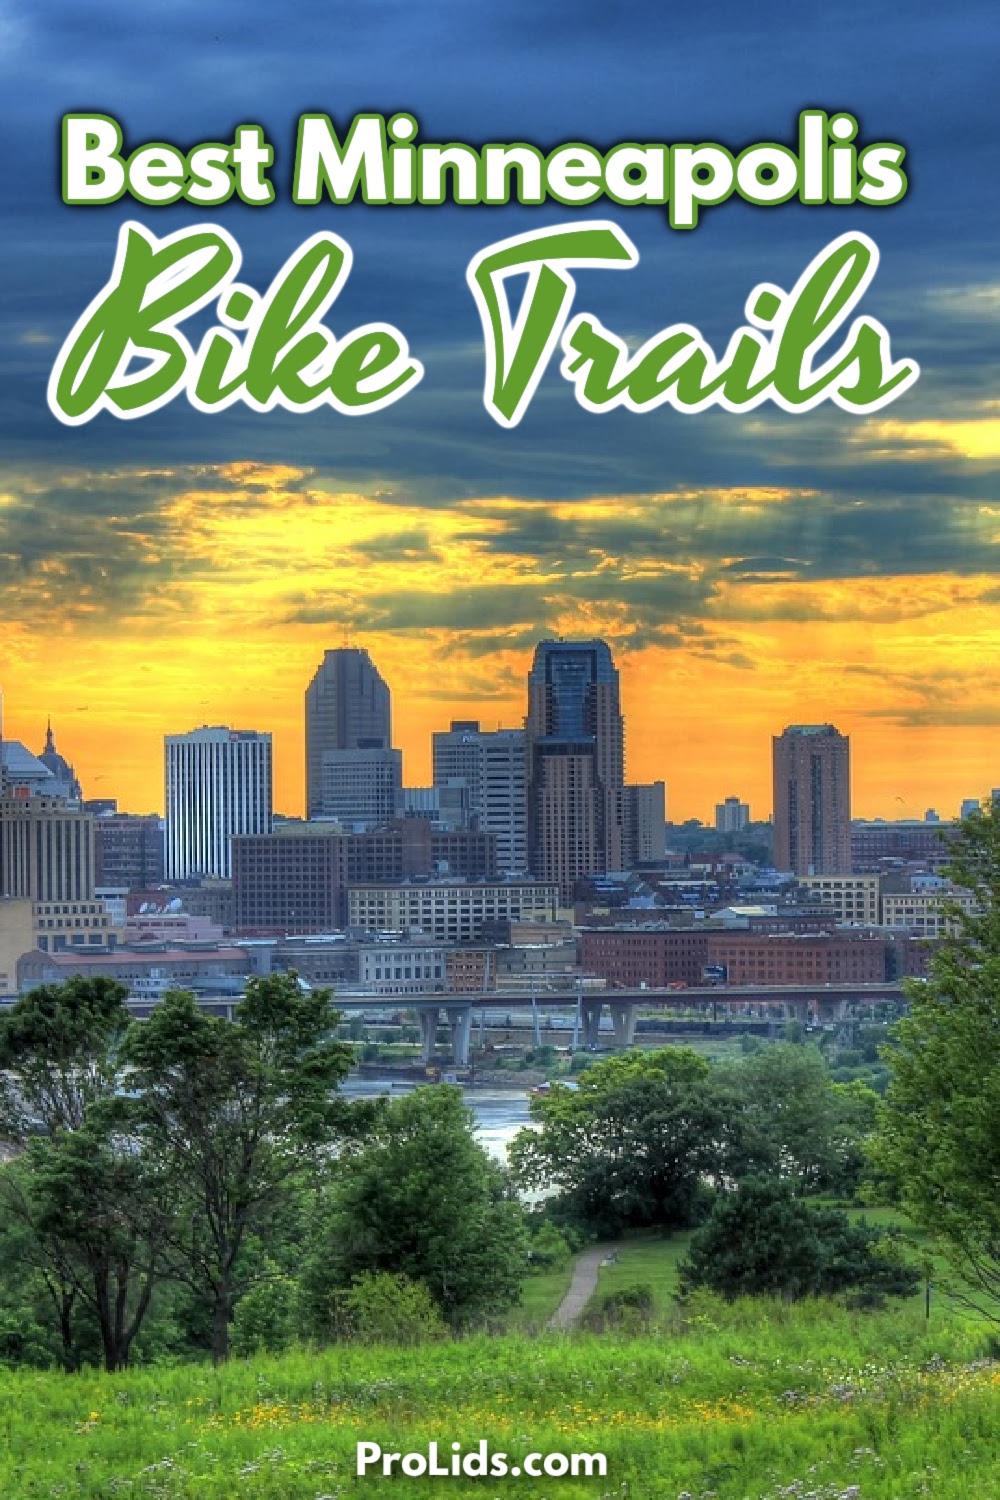 The best Minneapolis bike trails help make the city the best city in the country for riding bikes at all skill levels.